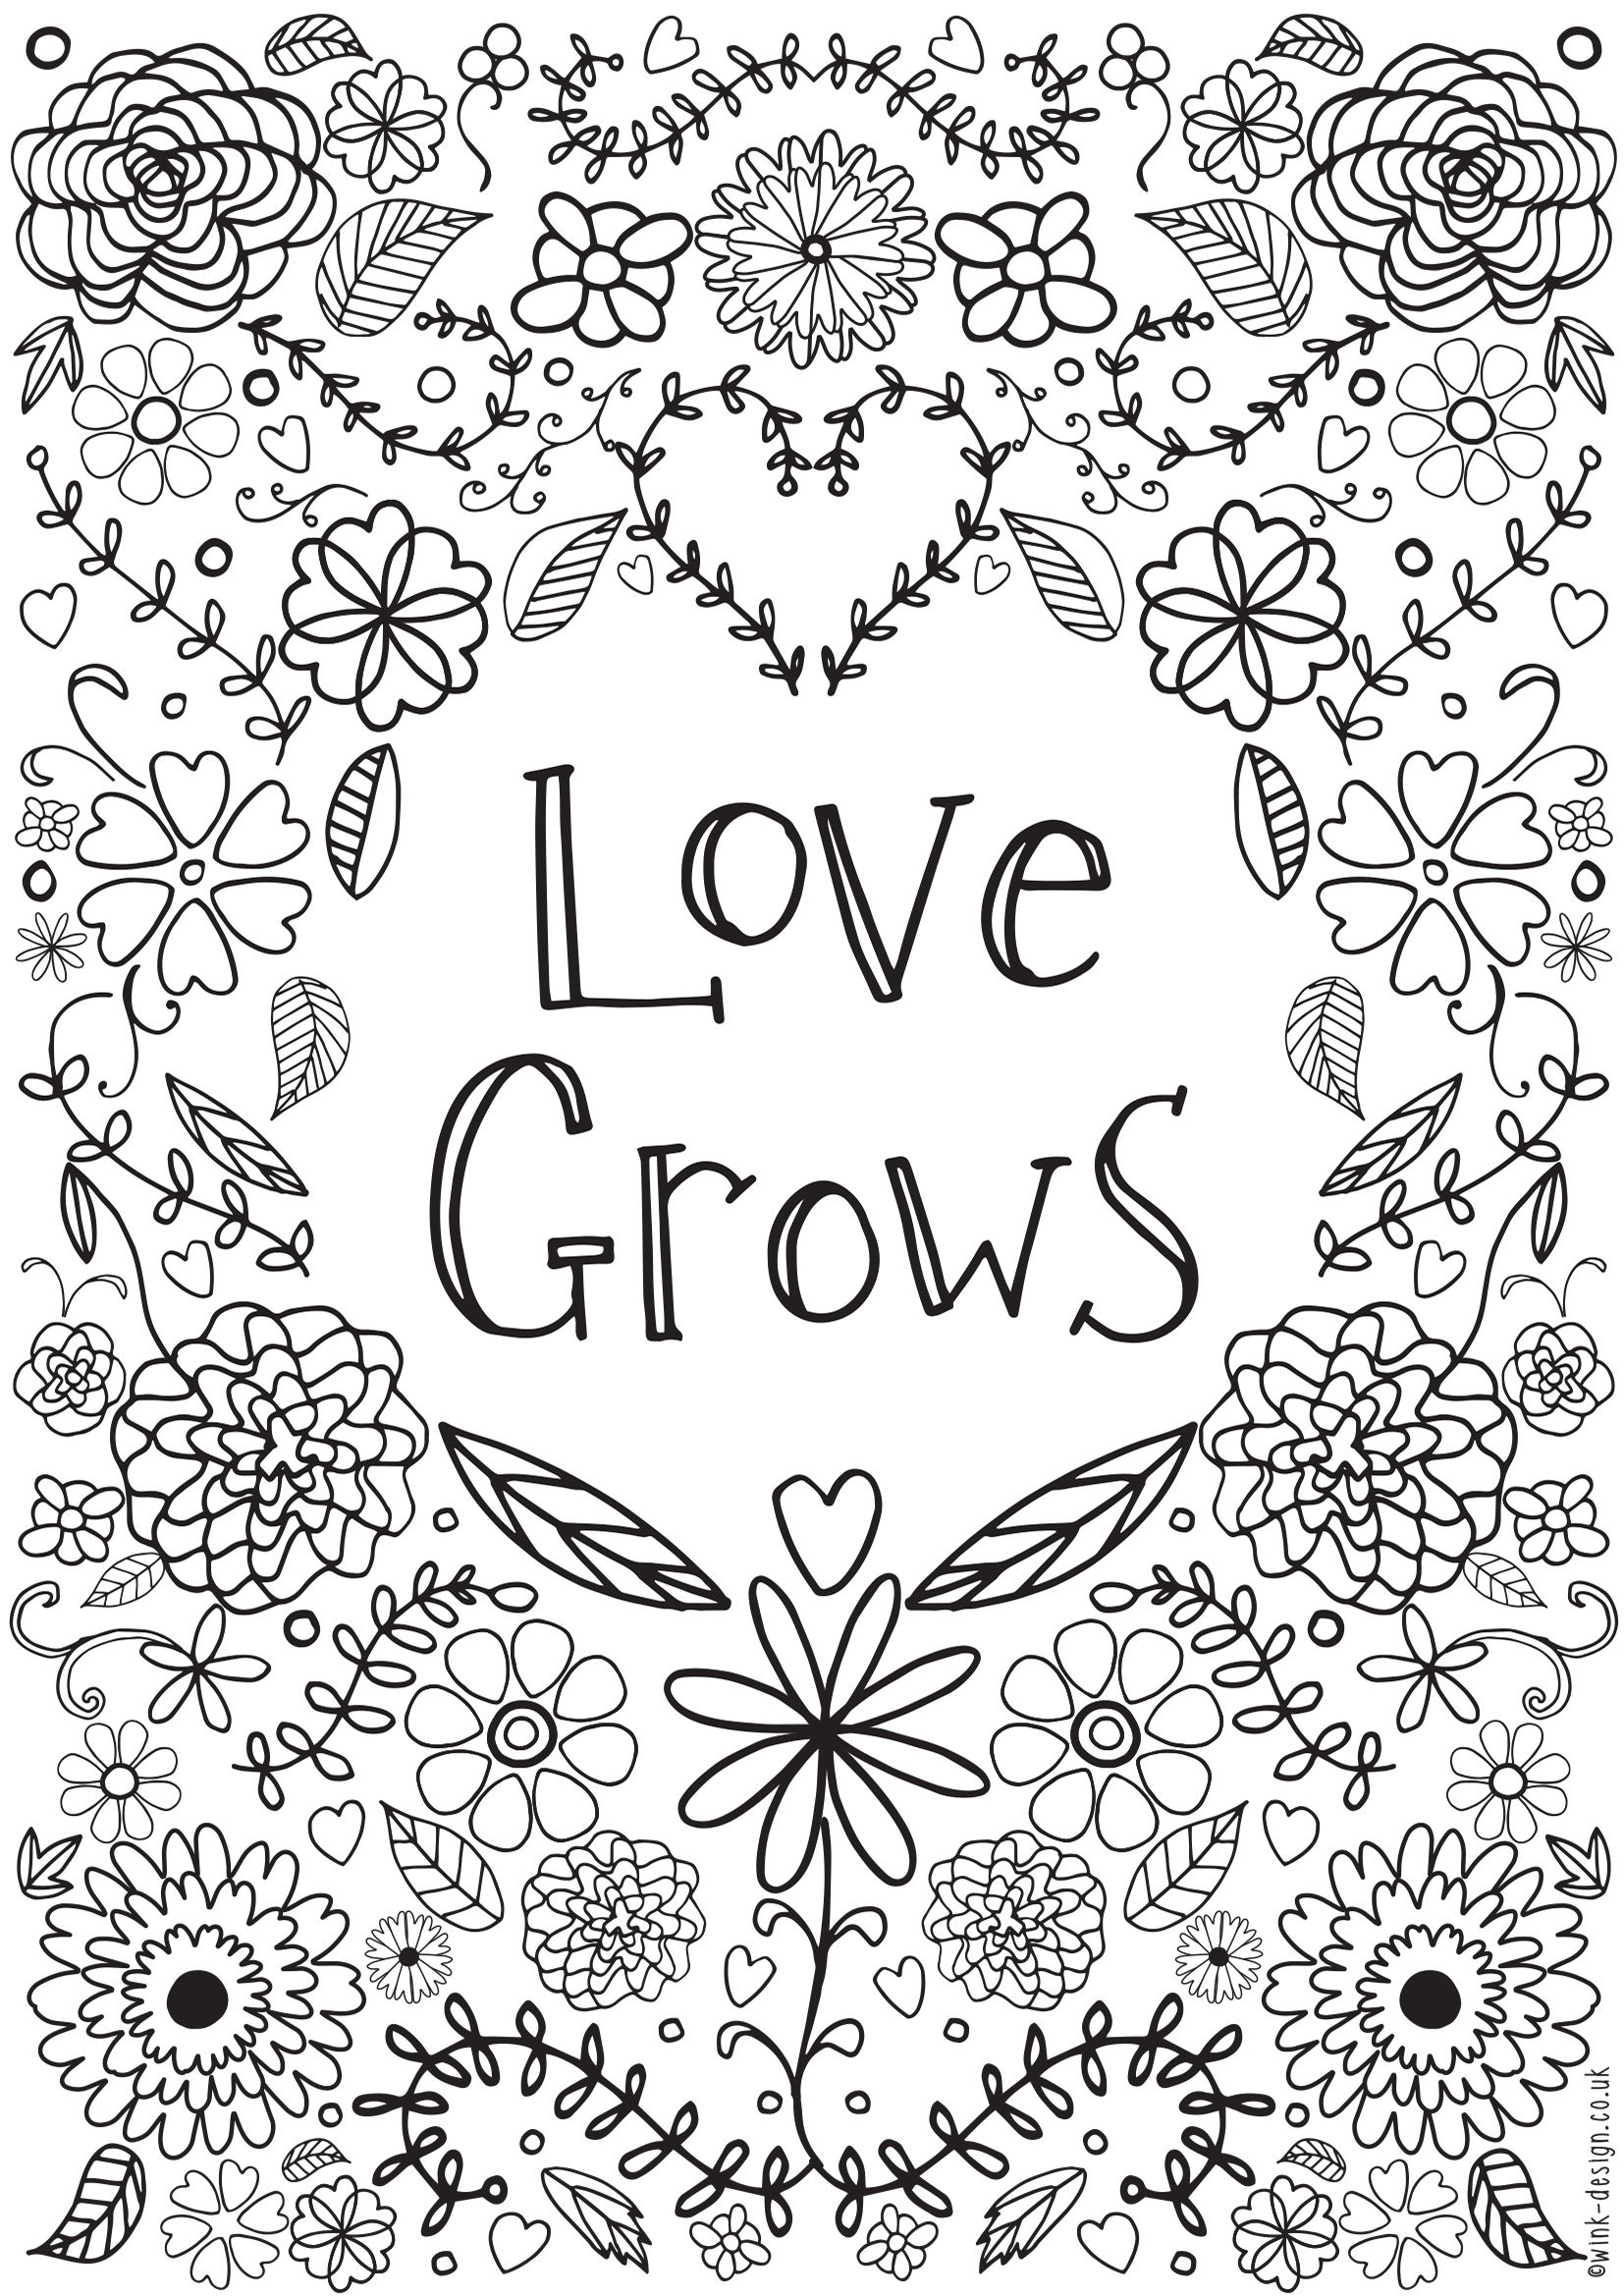 Awesome Adult Coloring Pages At Getdrawings Free Download